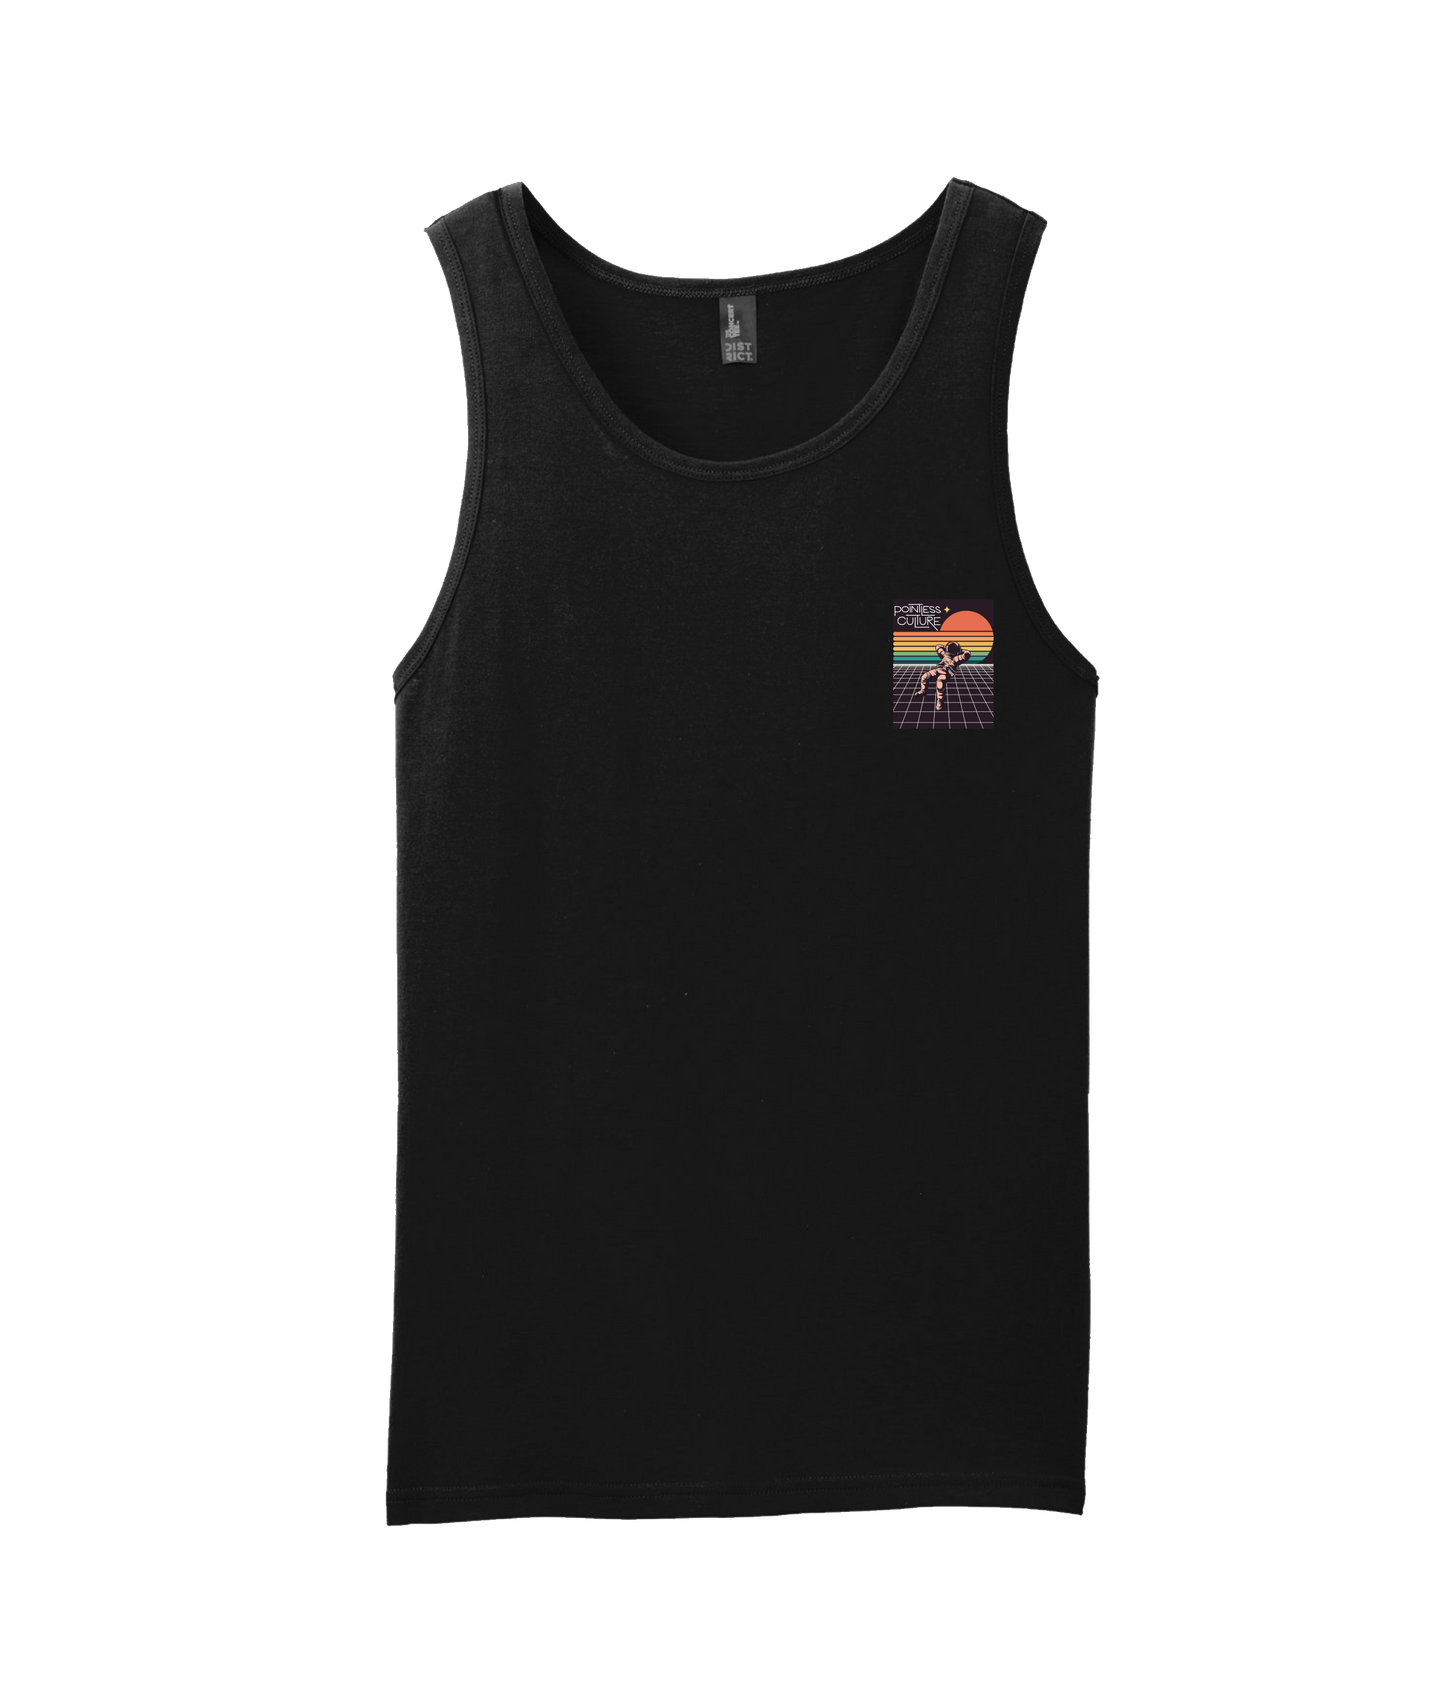 Pointless Culture - PC Astronaut - Black Tank Top